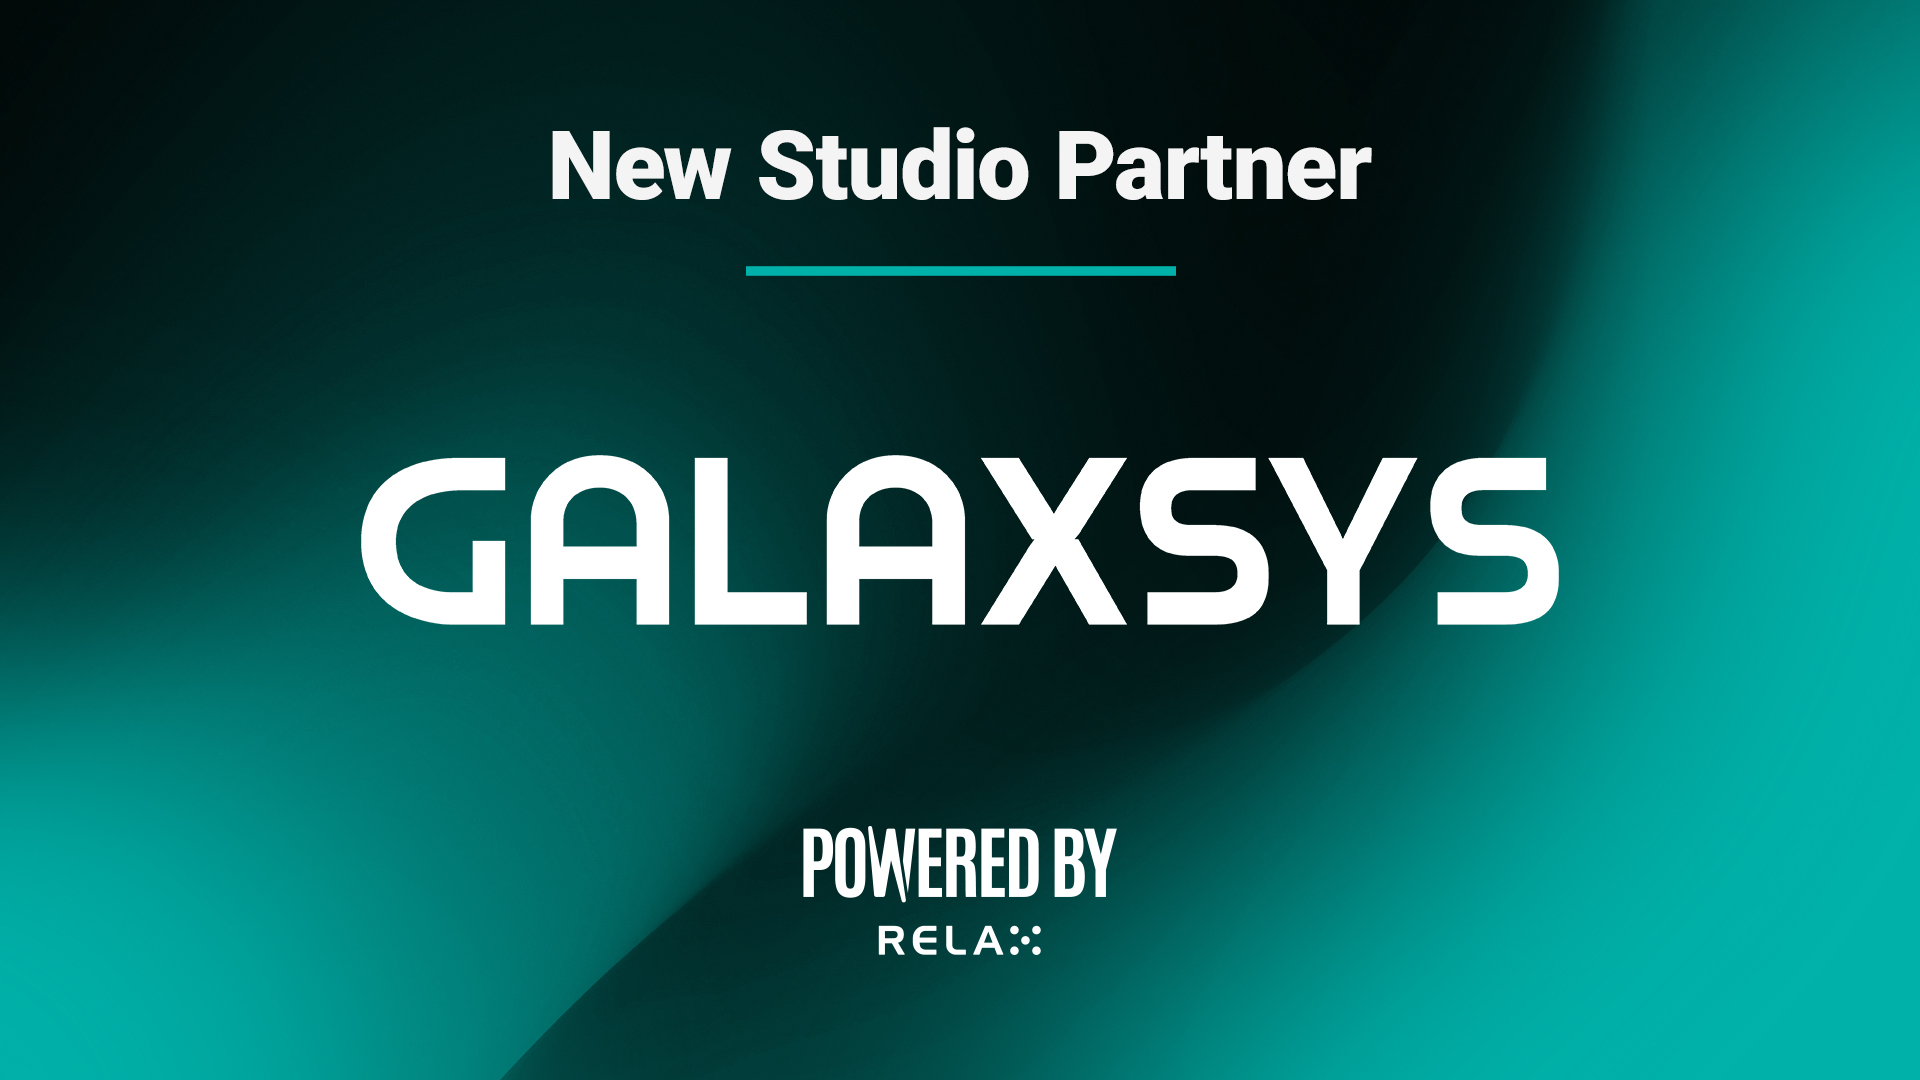 Relax Gaming welcomes Galaxsys as its latest Powered By studio partner